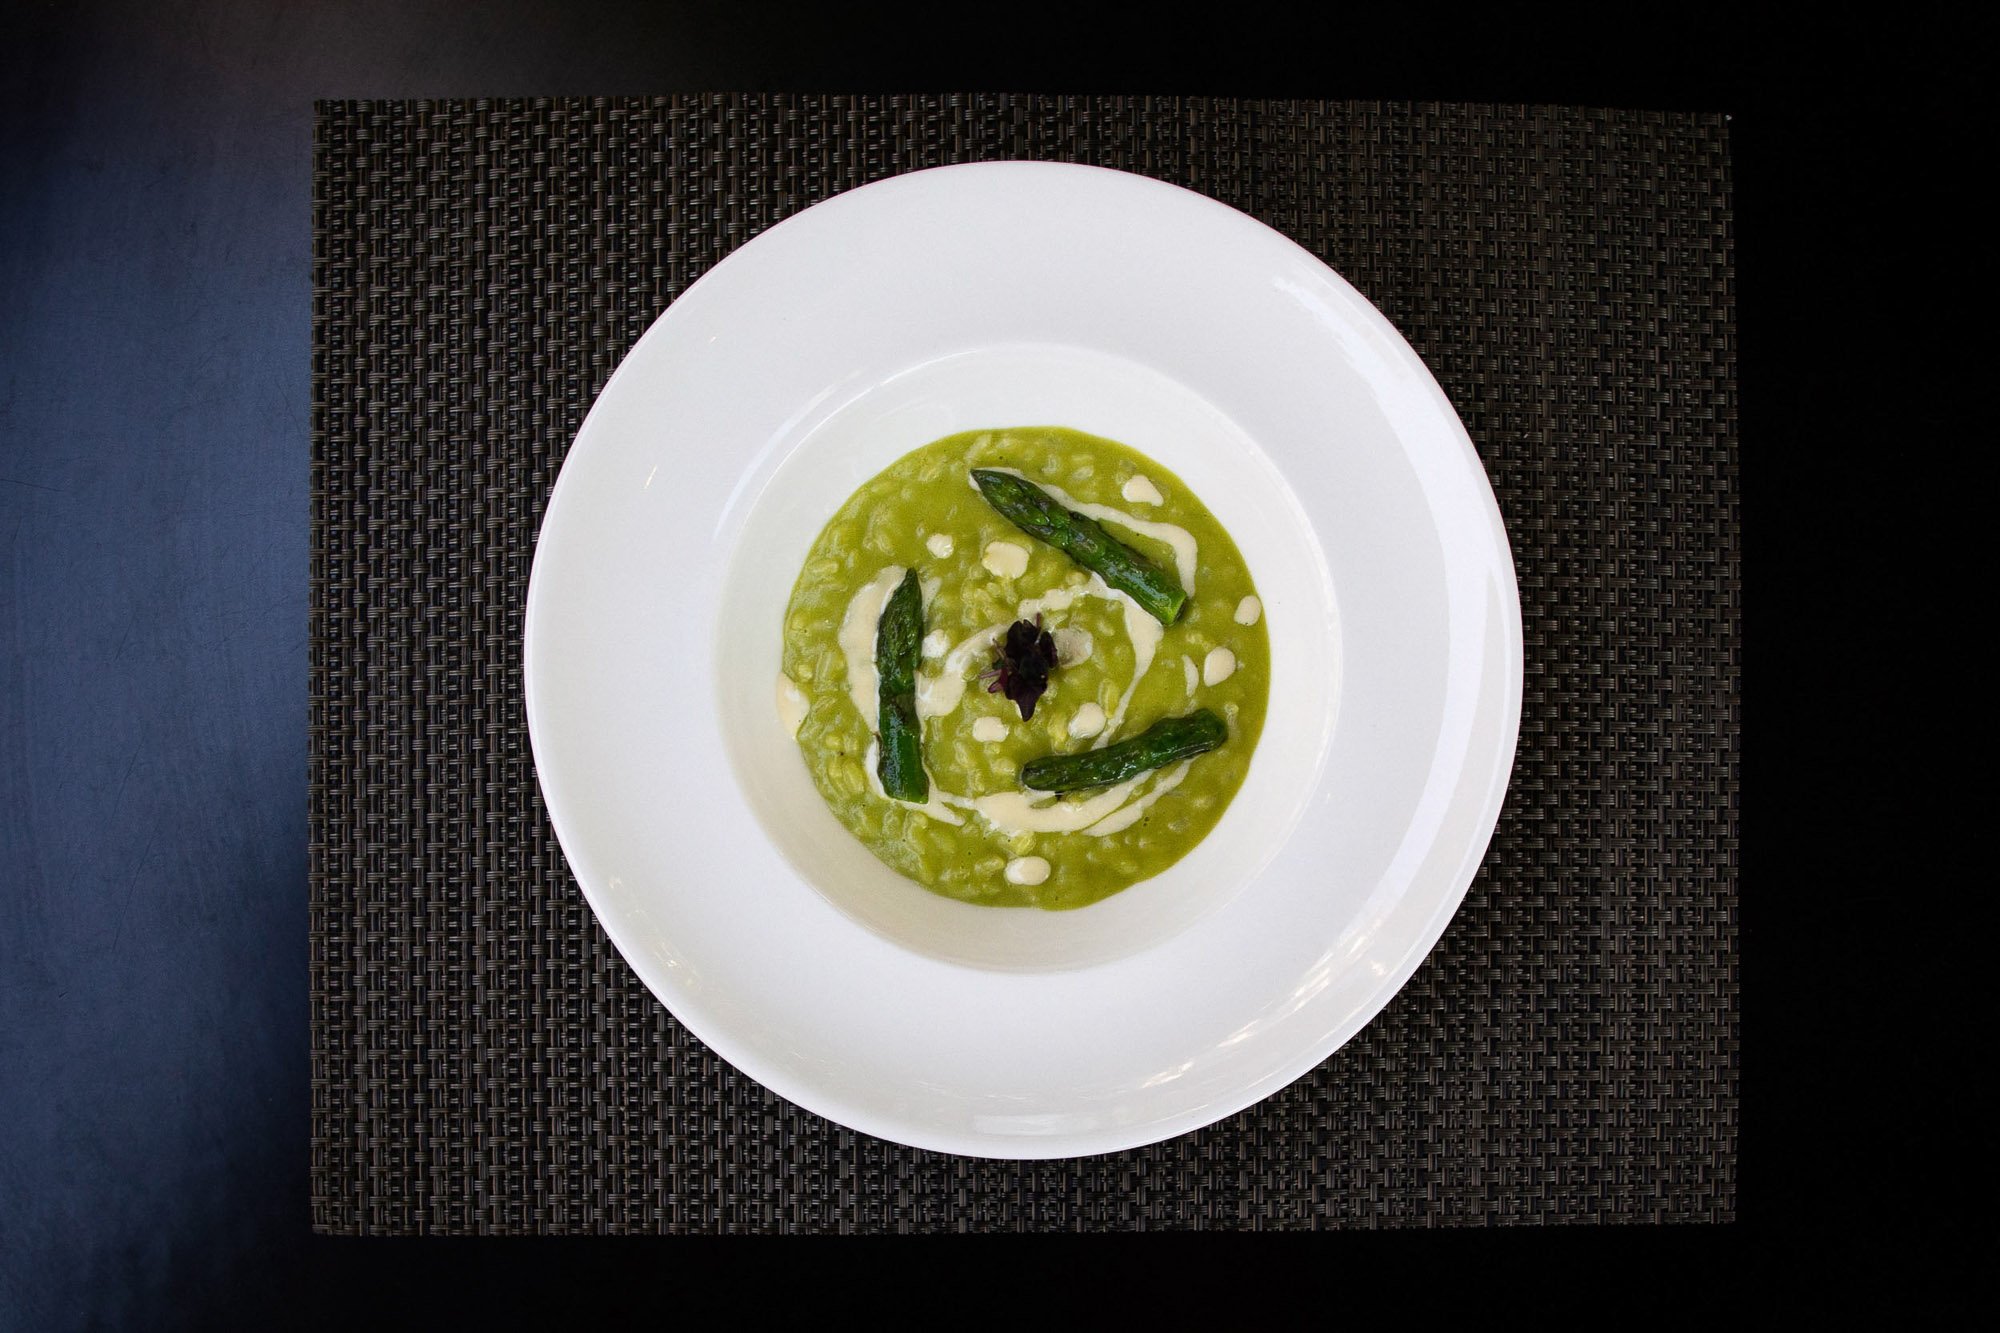 Pea risotto with asparagus served in a large white bowl.jpg